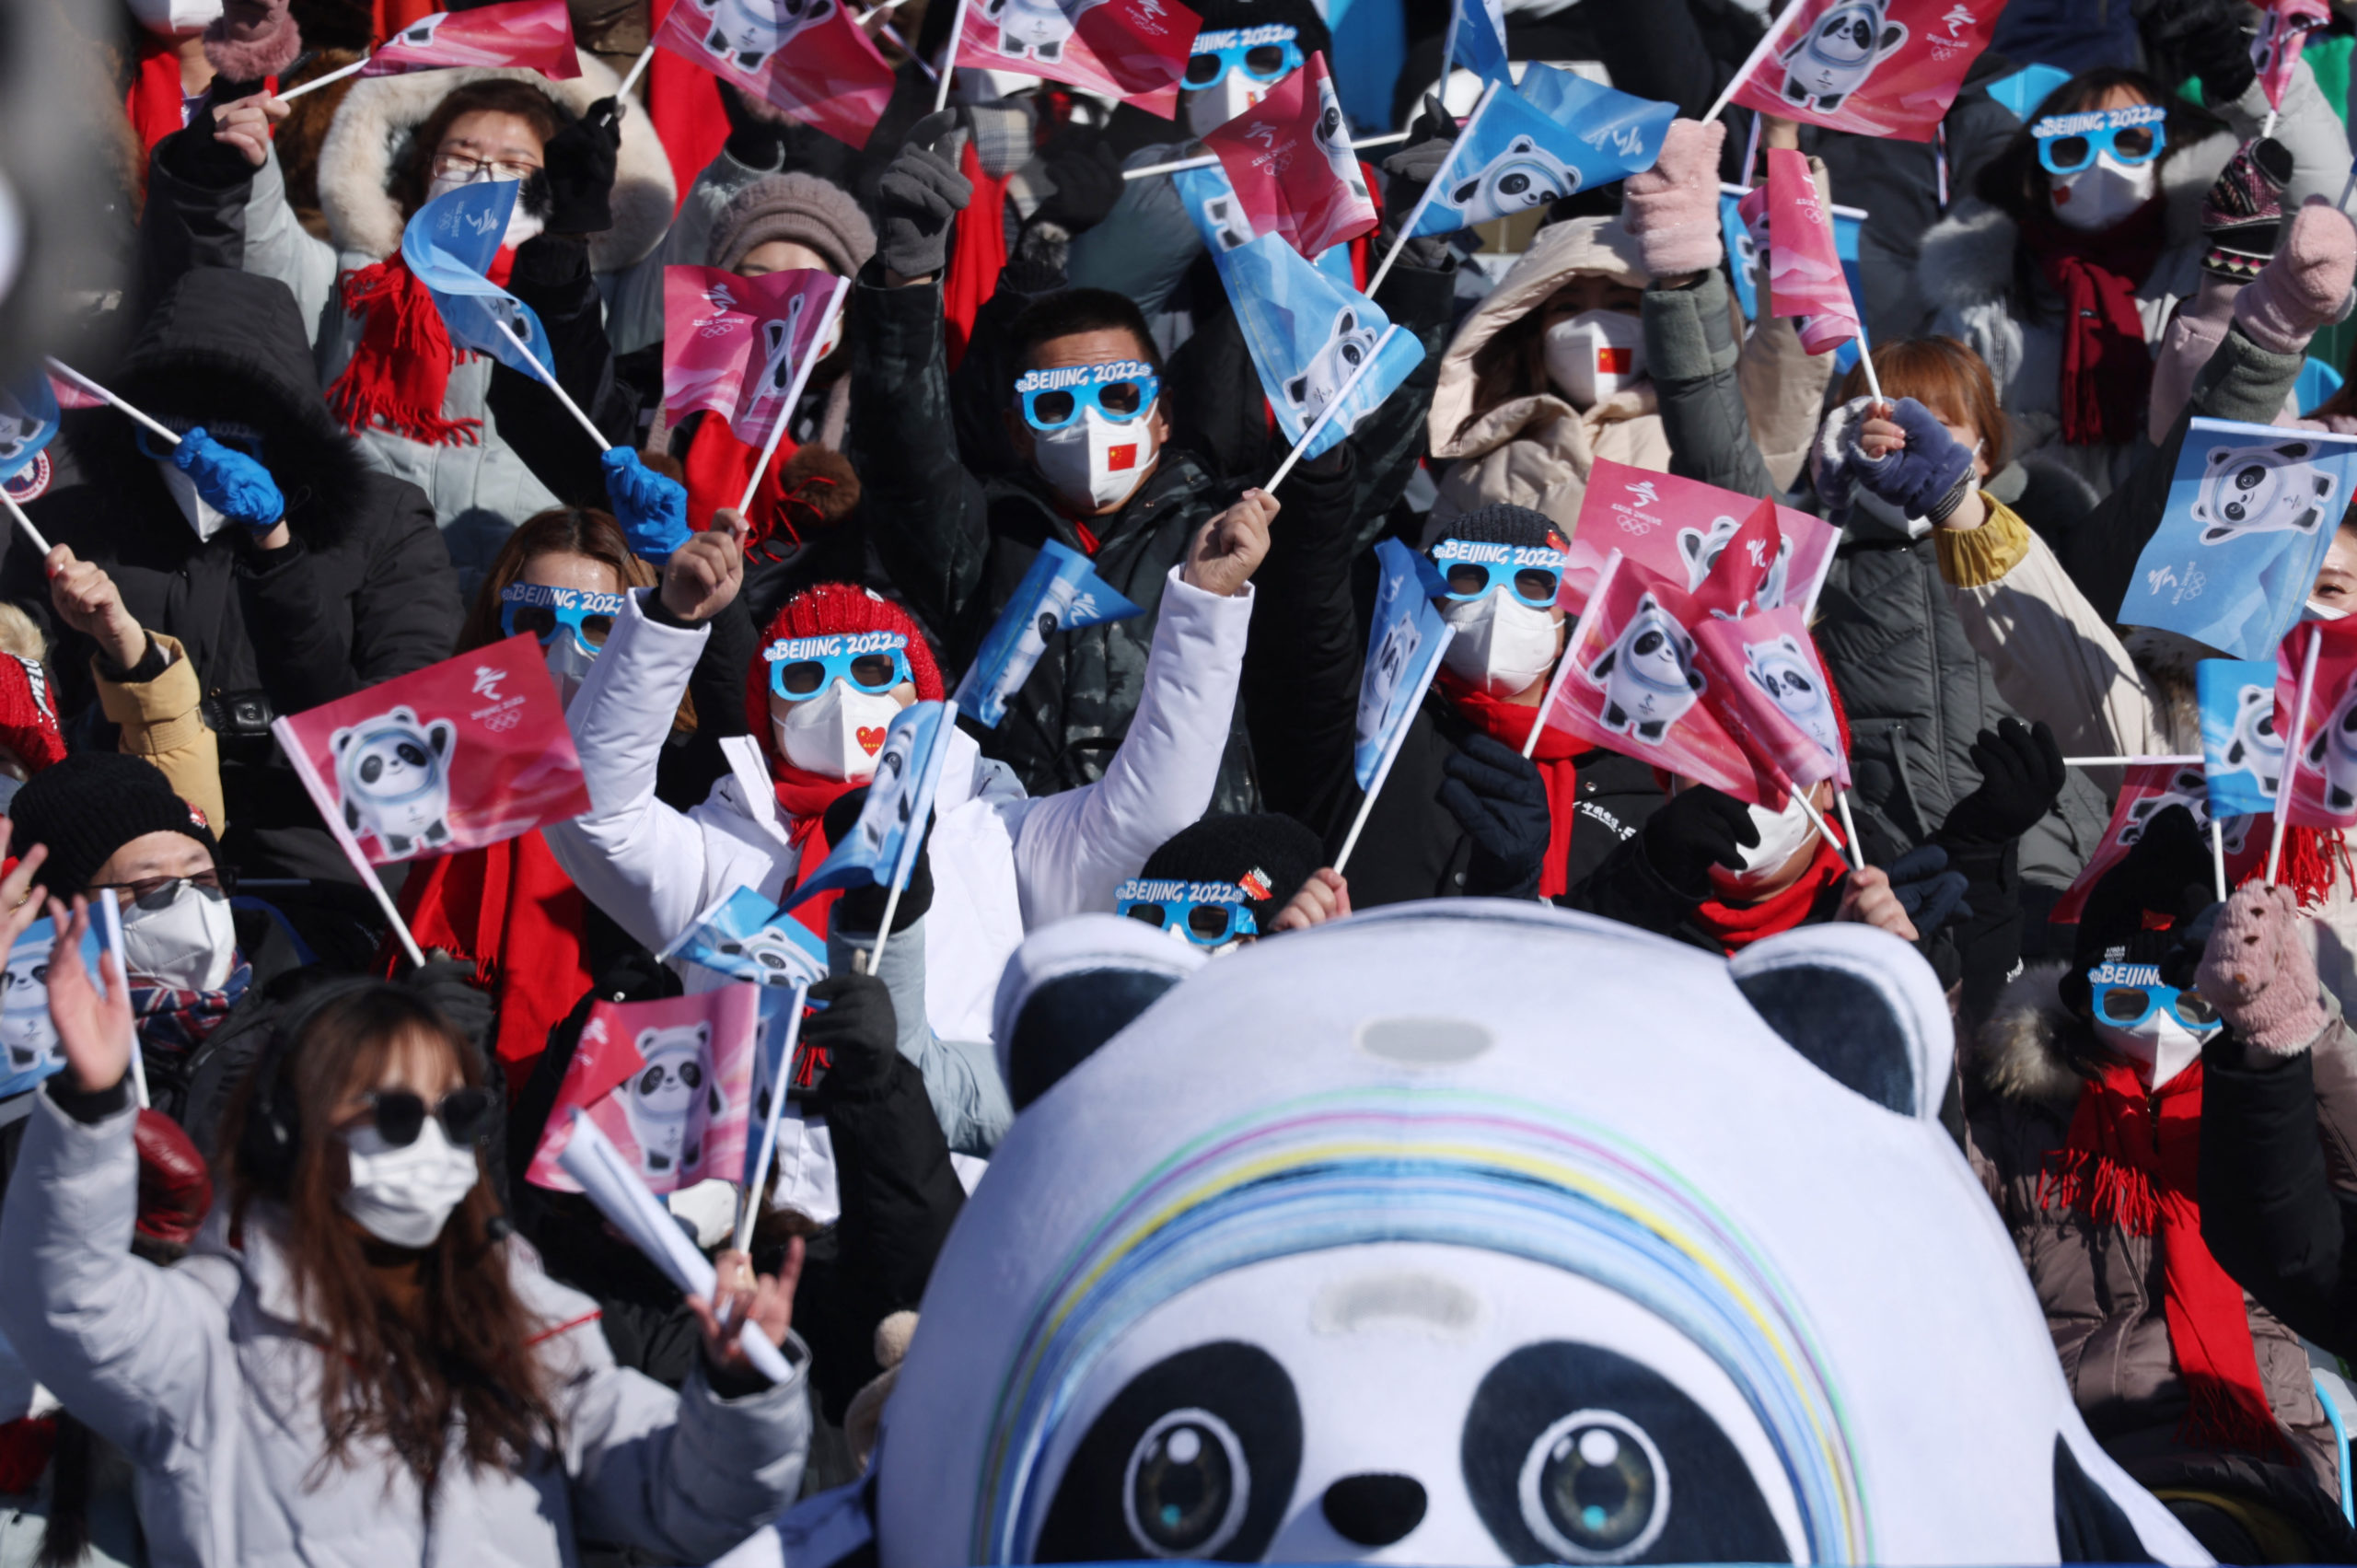 2022 Beijing Olympics - Snowboard - Women's Parallel Giant Slalom 1/8 Finals - Genting Snow Park, Zhangjiakou, China - February 8, 2022. Spectators wearing masks before the start of the event. R